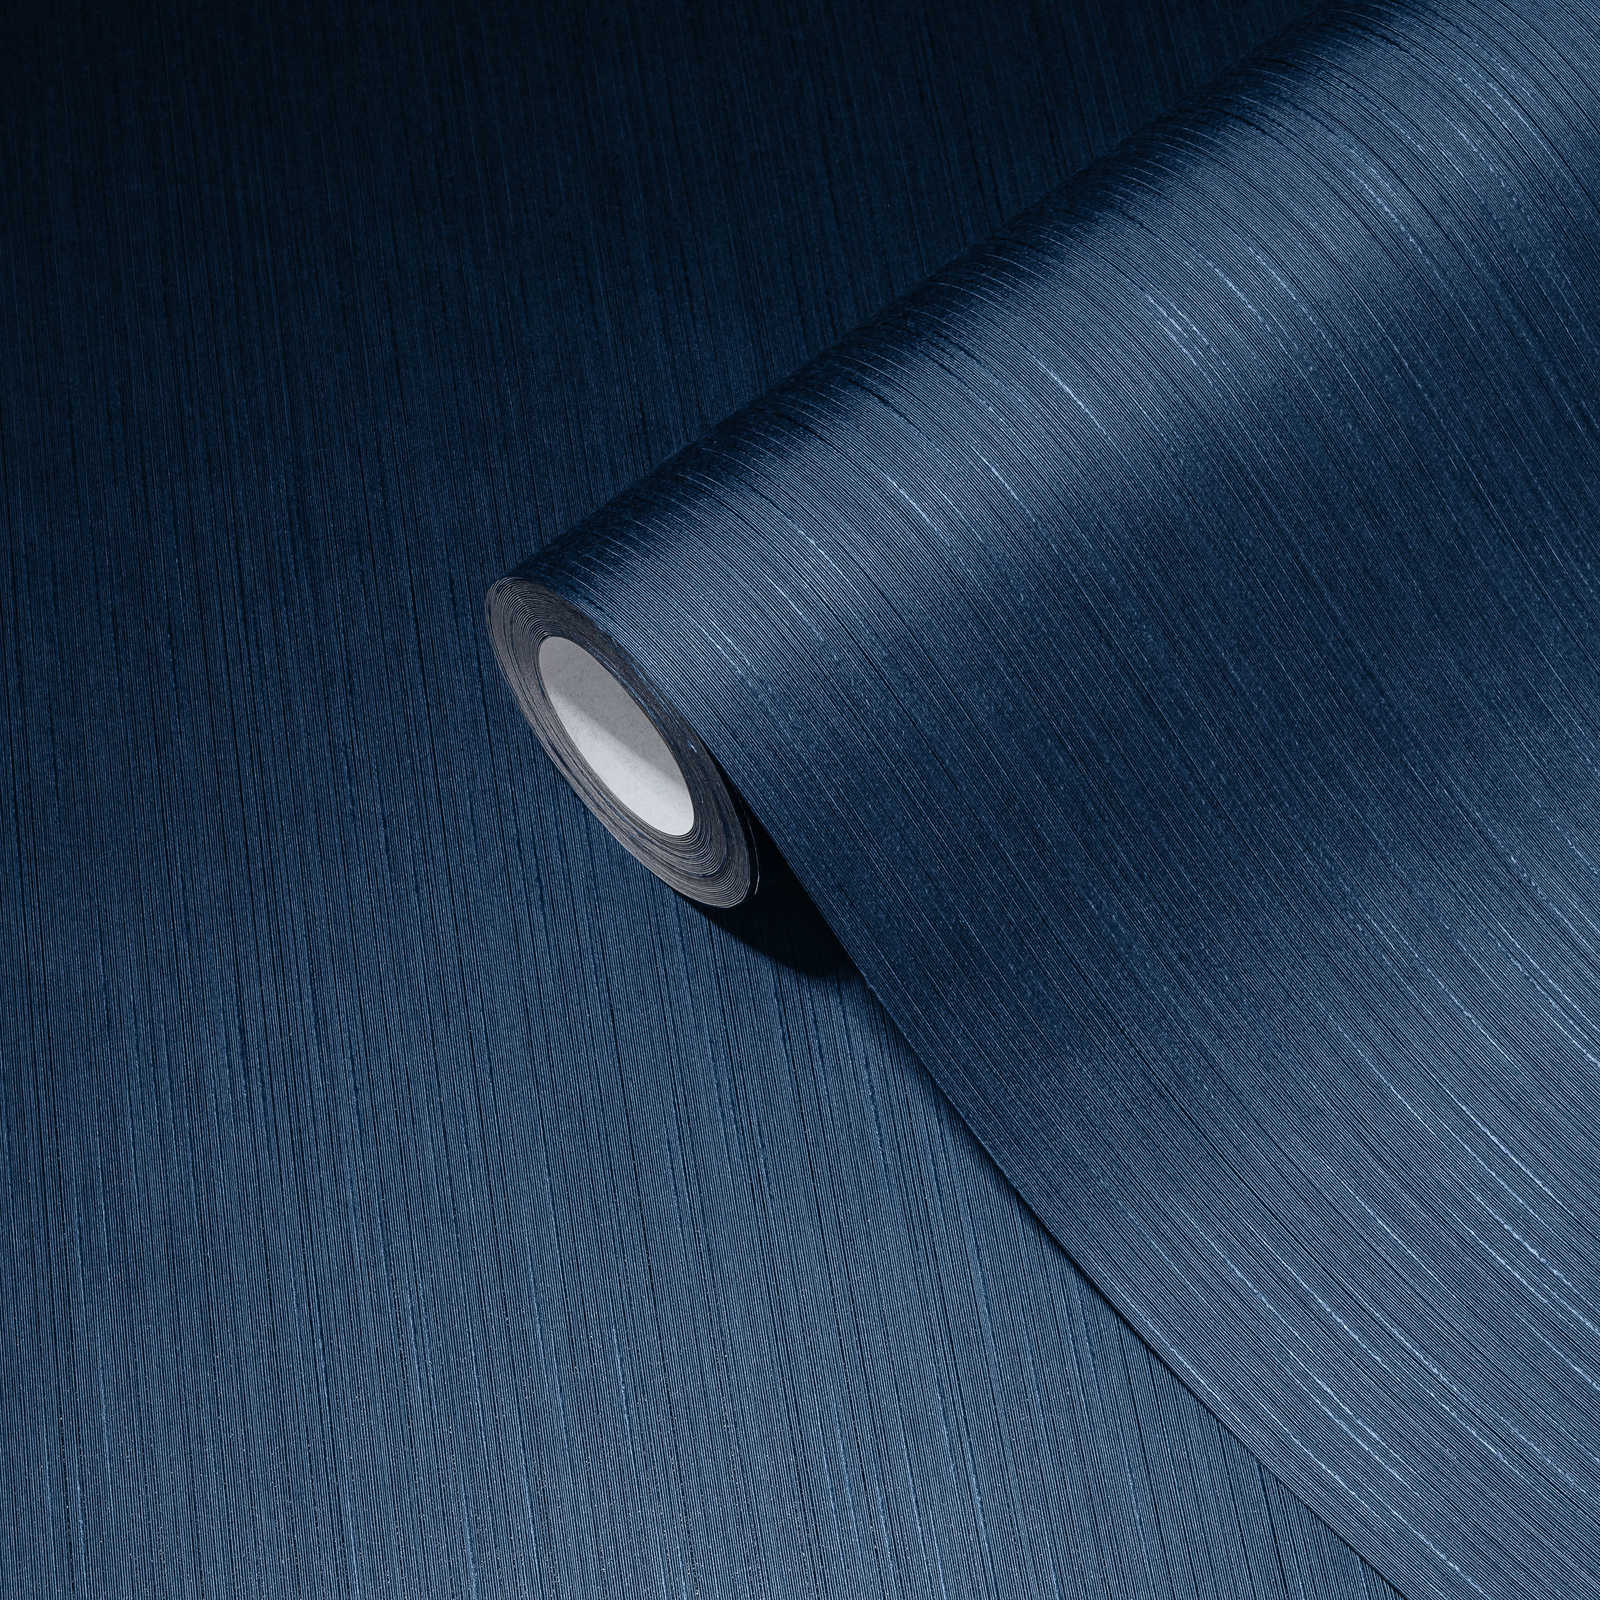             Plain non-woven wallpaper with lined structure pattern - blue
        